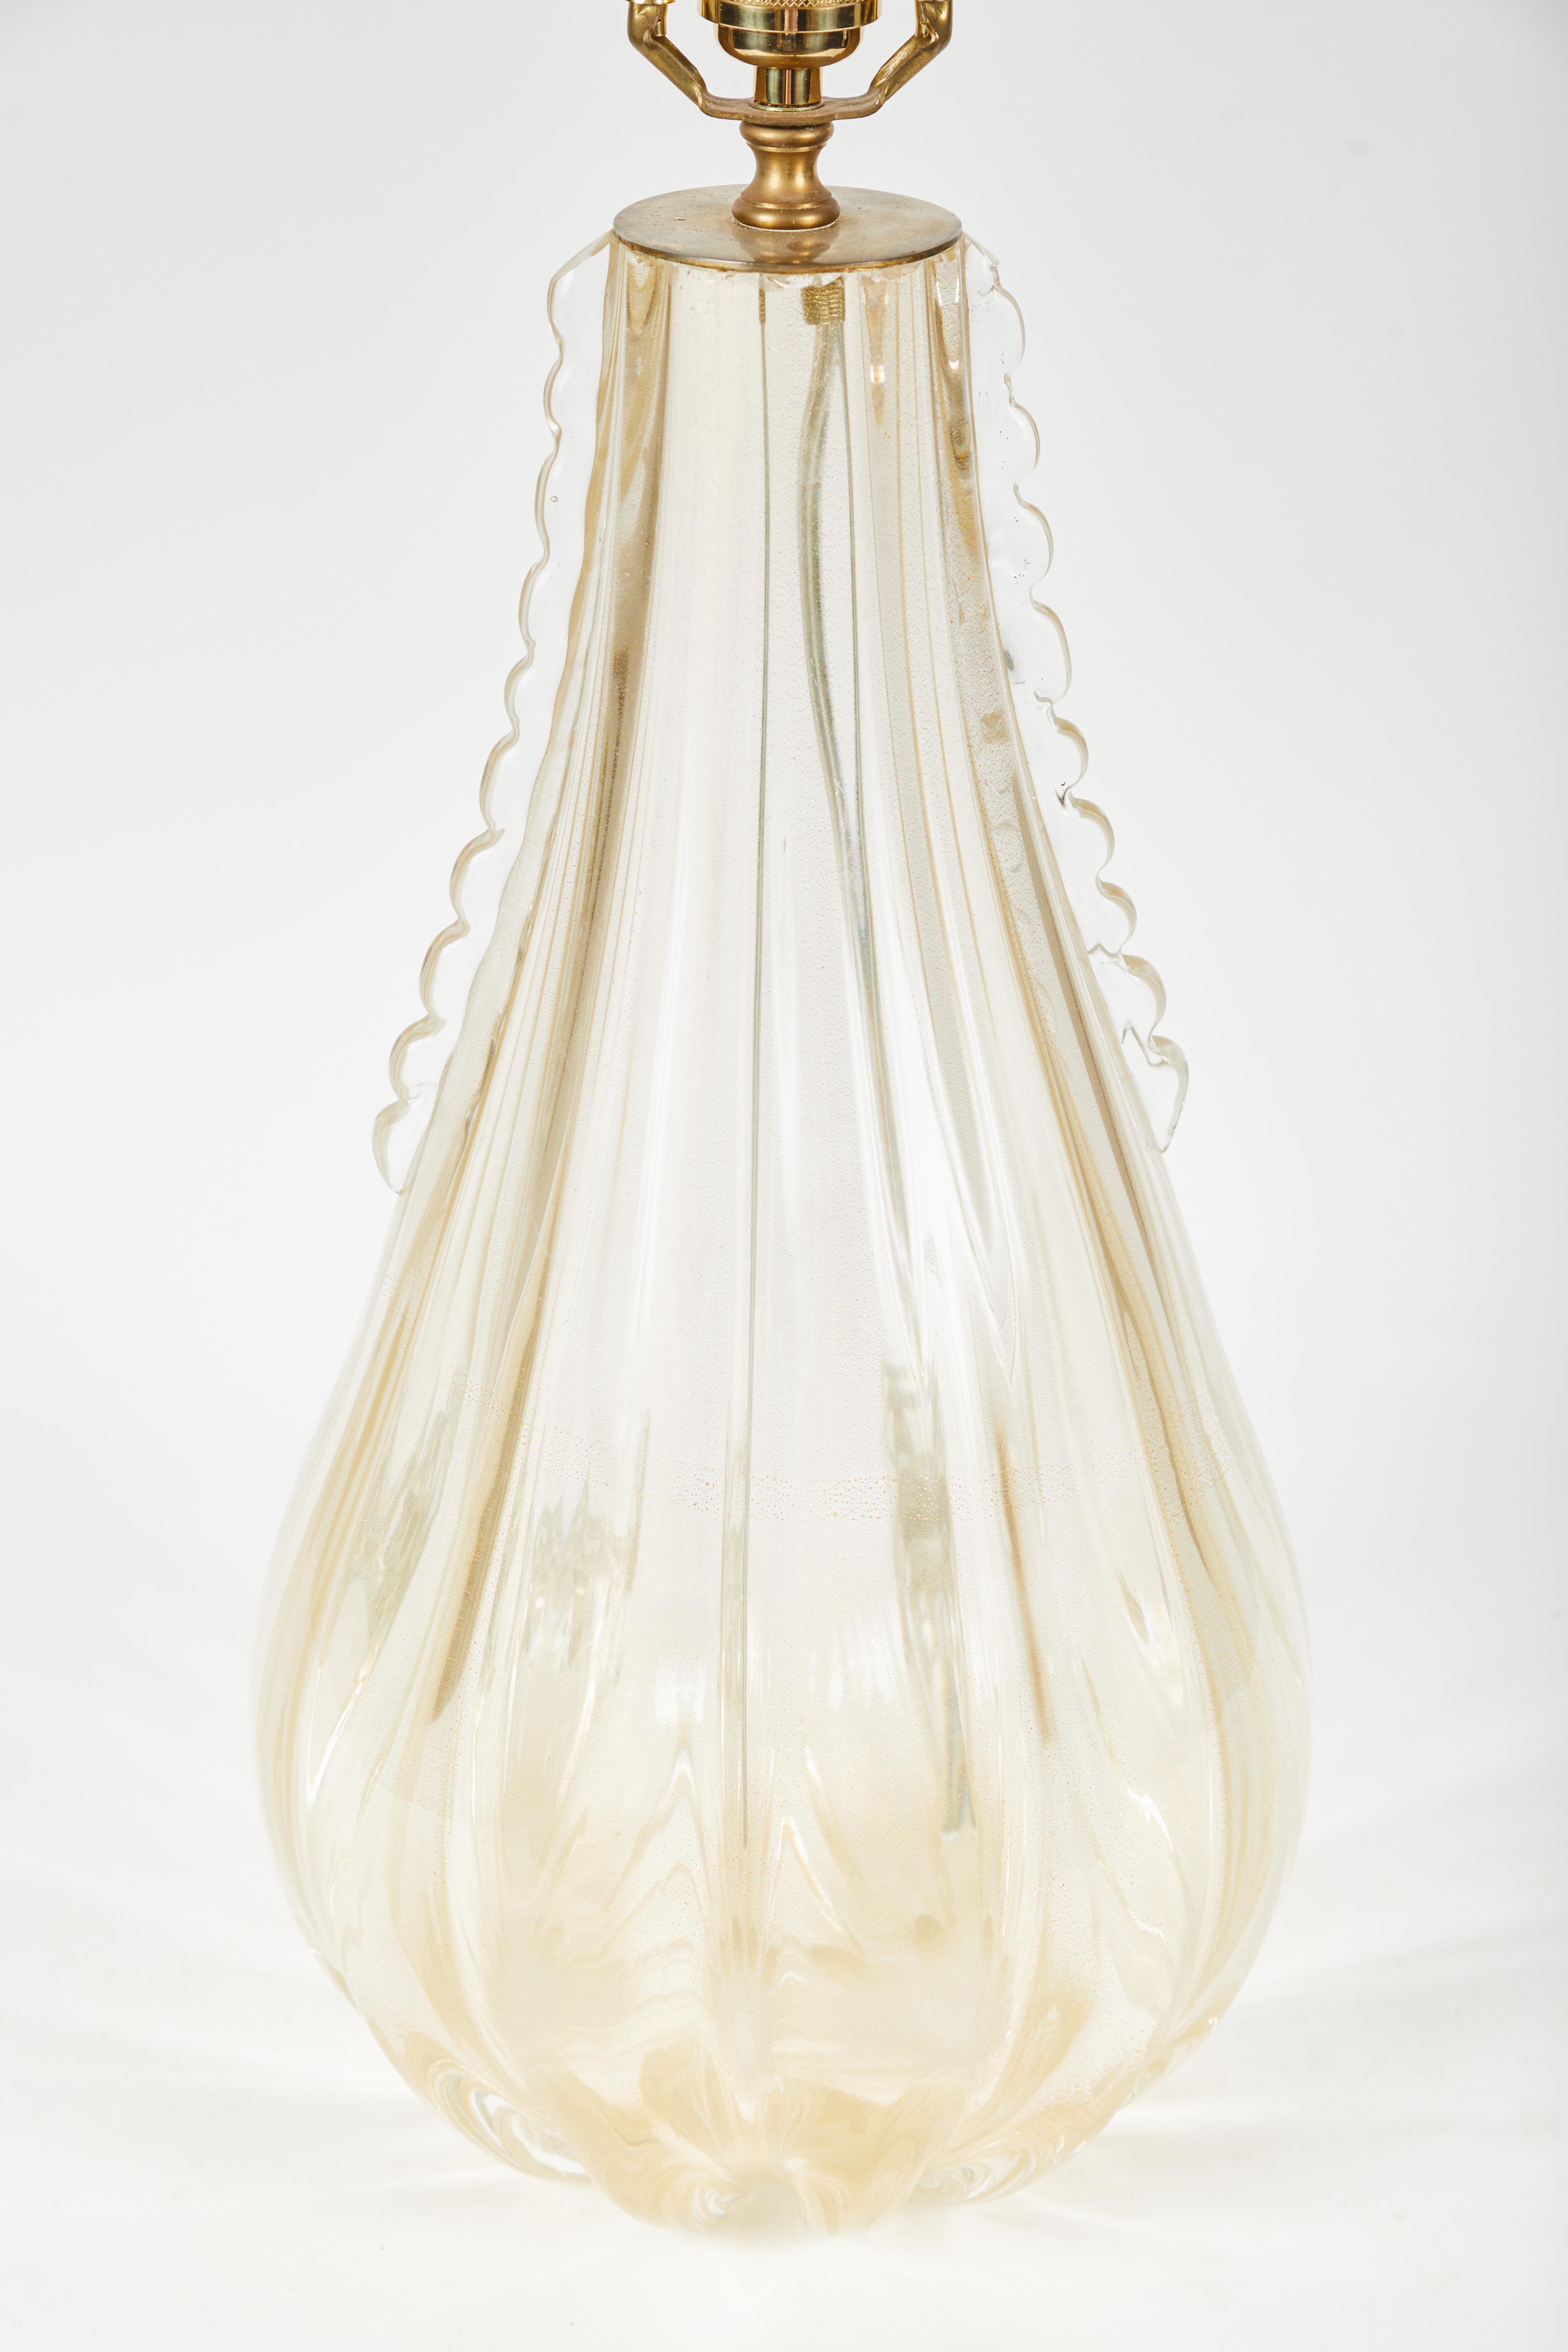 Murano Glass Pair of Gold Venetian Teardrop Lamps with Pongee Silk Shades